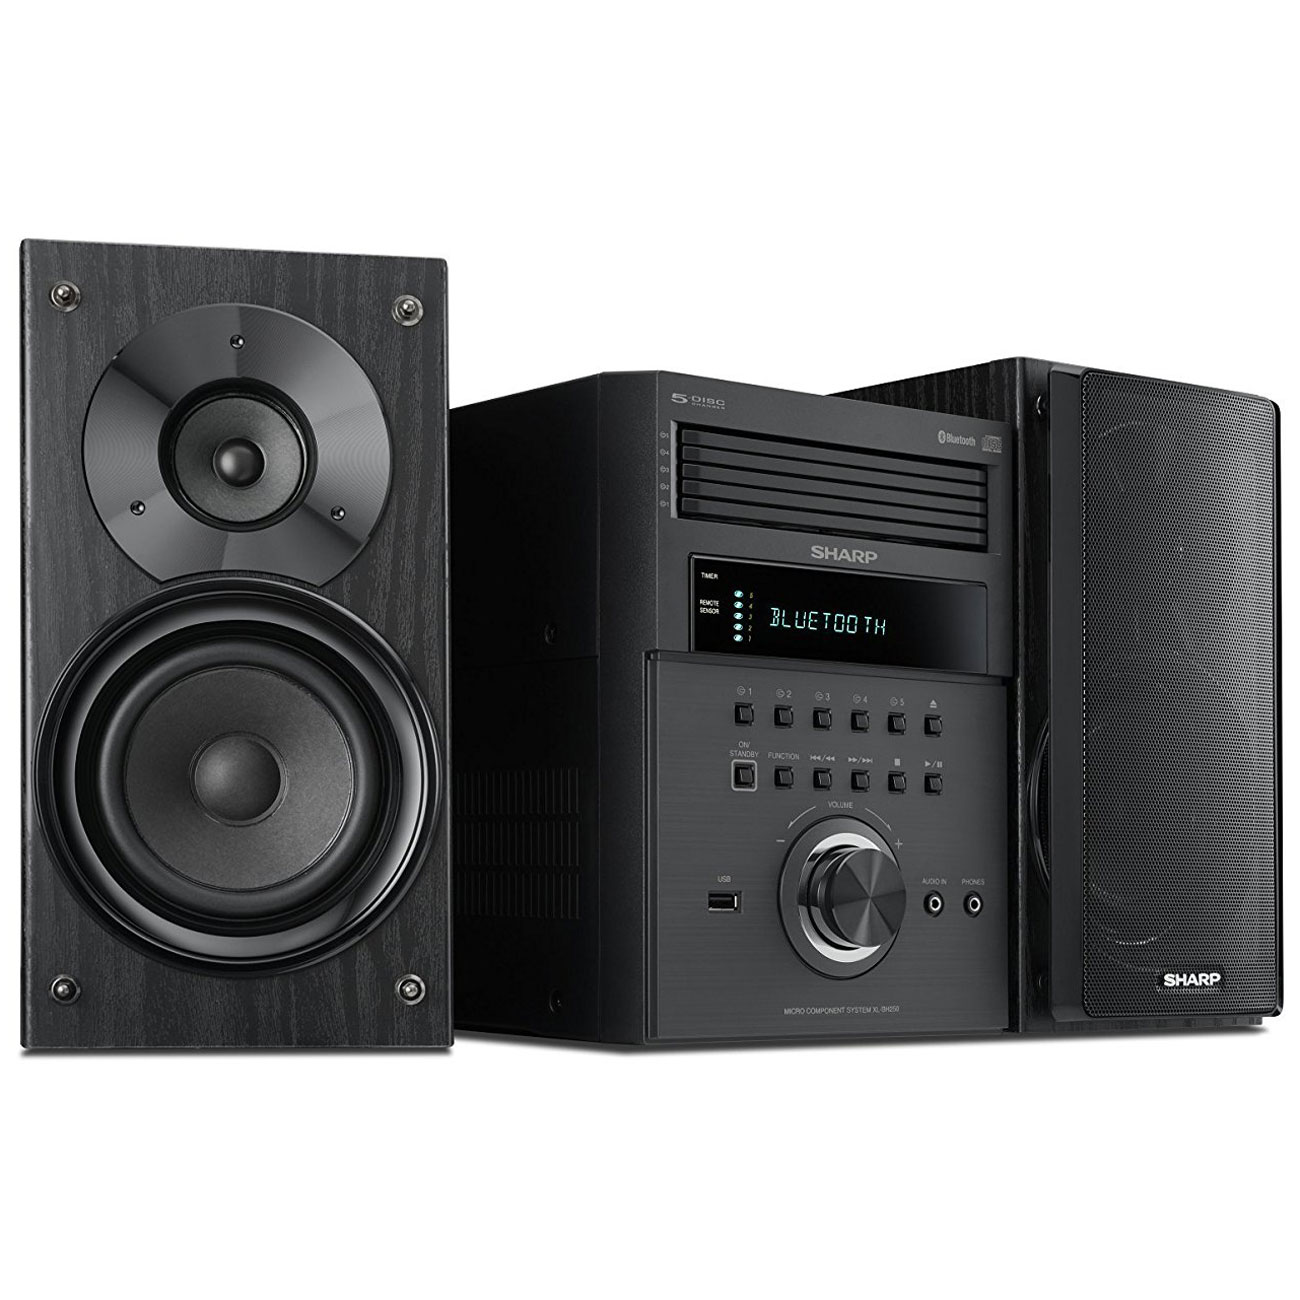 Sharp XL-BH250 Sharp 5-Disc Micro Shelf Executive Speaker System with Bluetooth, USB Port for MP3 Playback, AM/FM, Audio in for Digital Players - image 2 of 2